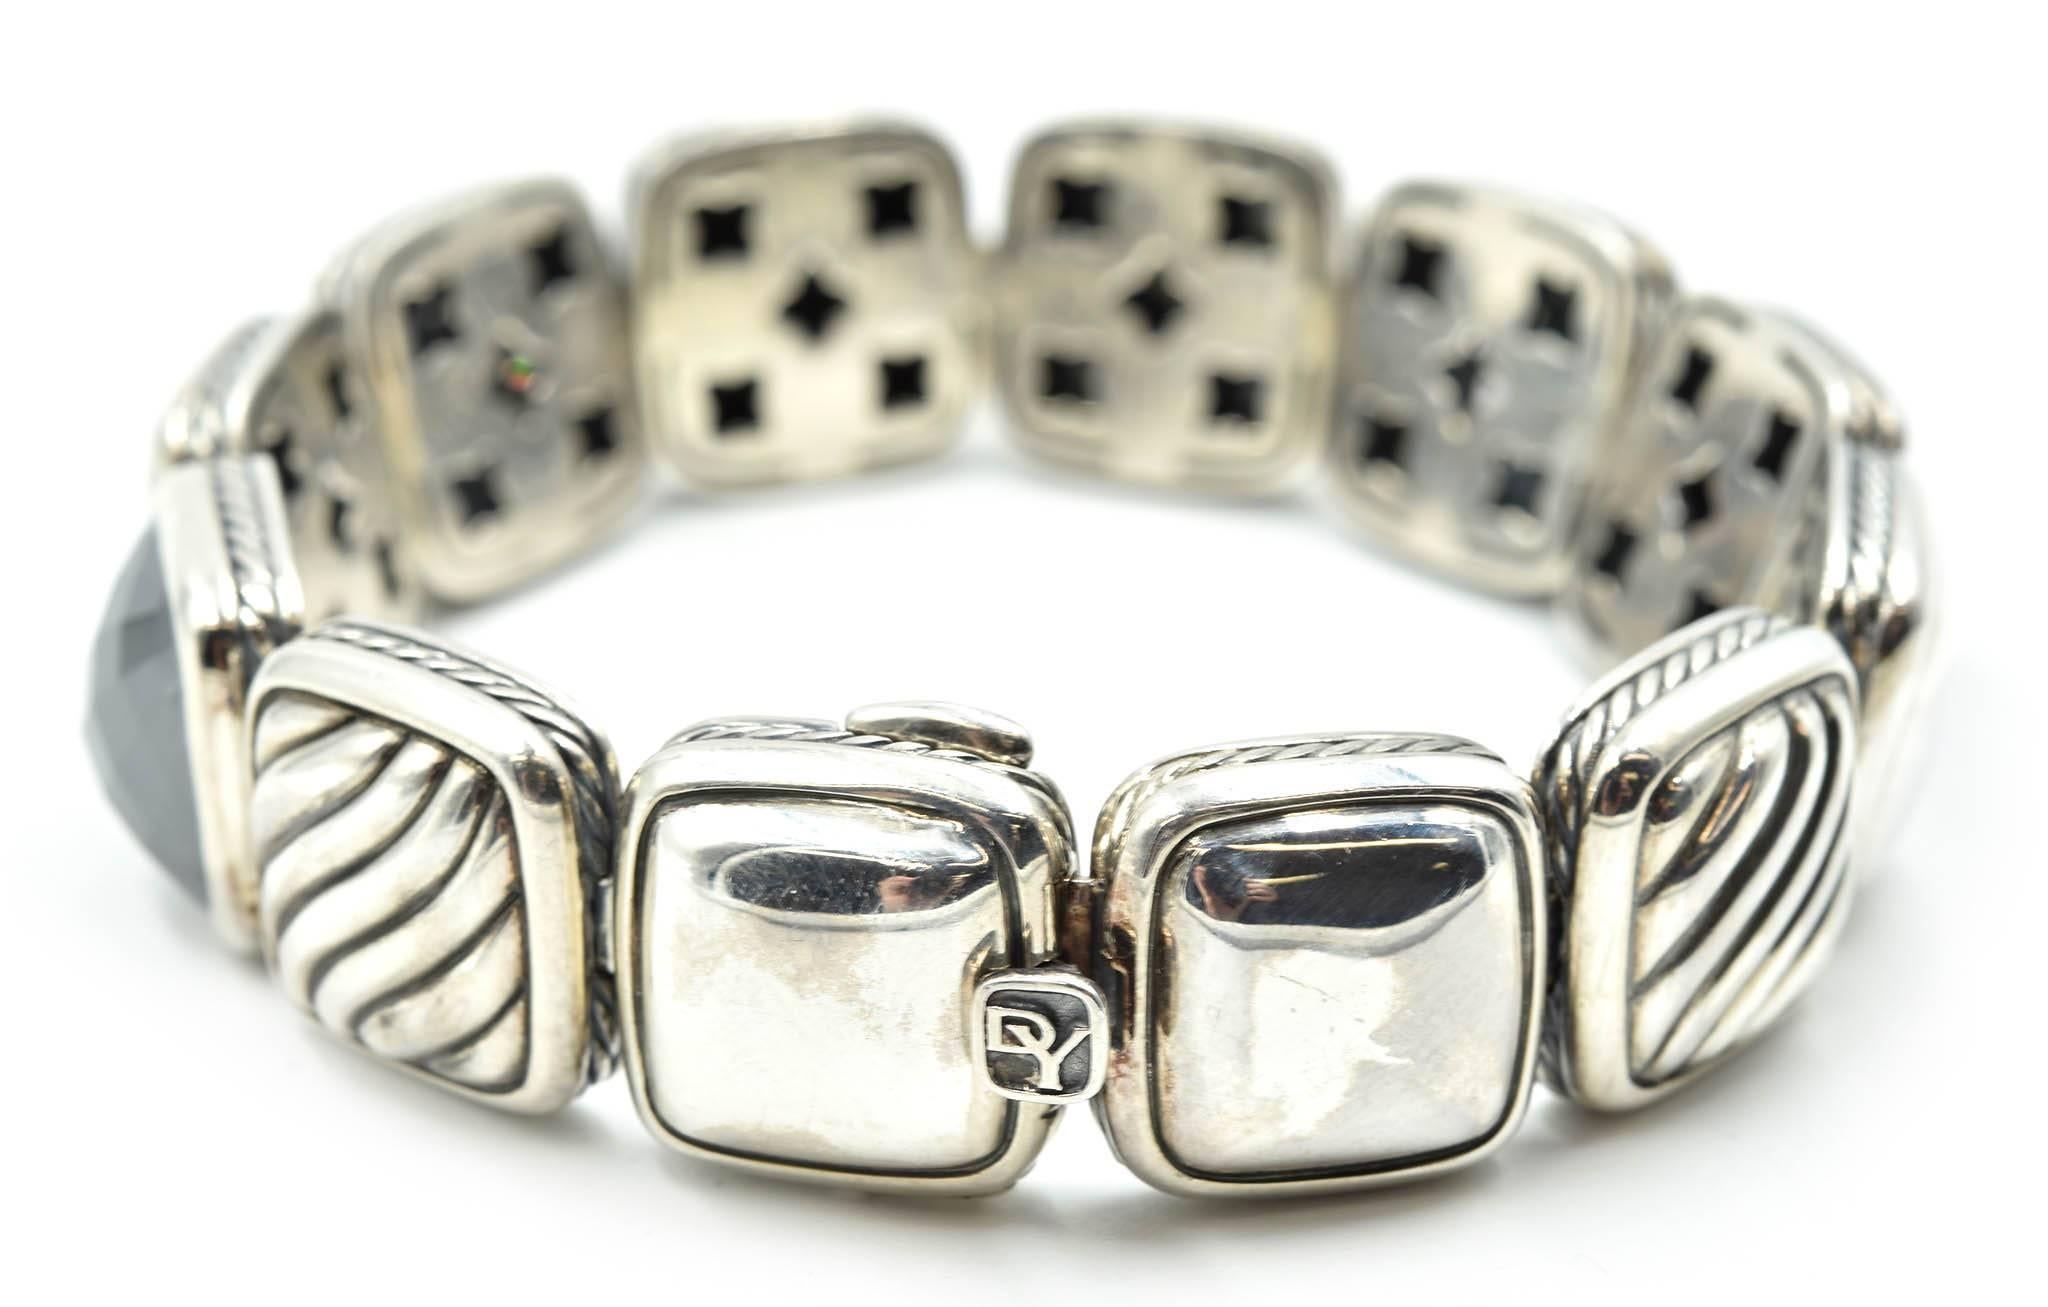 Designer: David Yurman
Collection: Chiclet
Material: sterling silver
Diamonds: 34 round brilliants = 1.02 carat total weight
Dimensions: bracelet is 7 inches long and ½ inch wide
Weight: 54.30 grams

